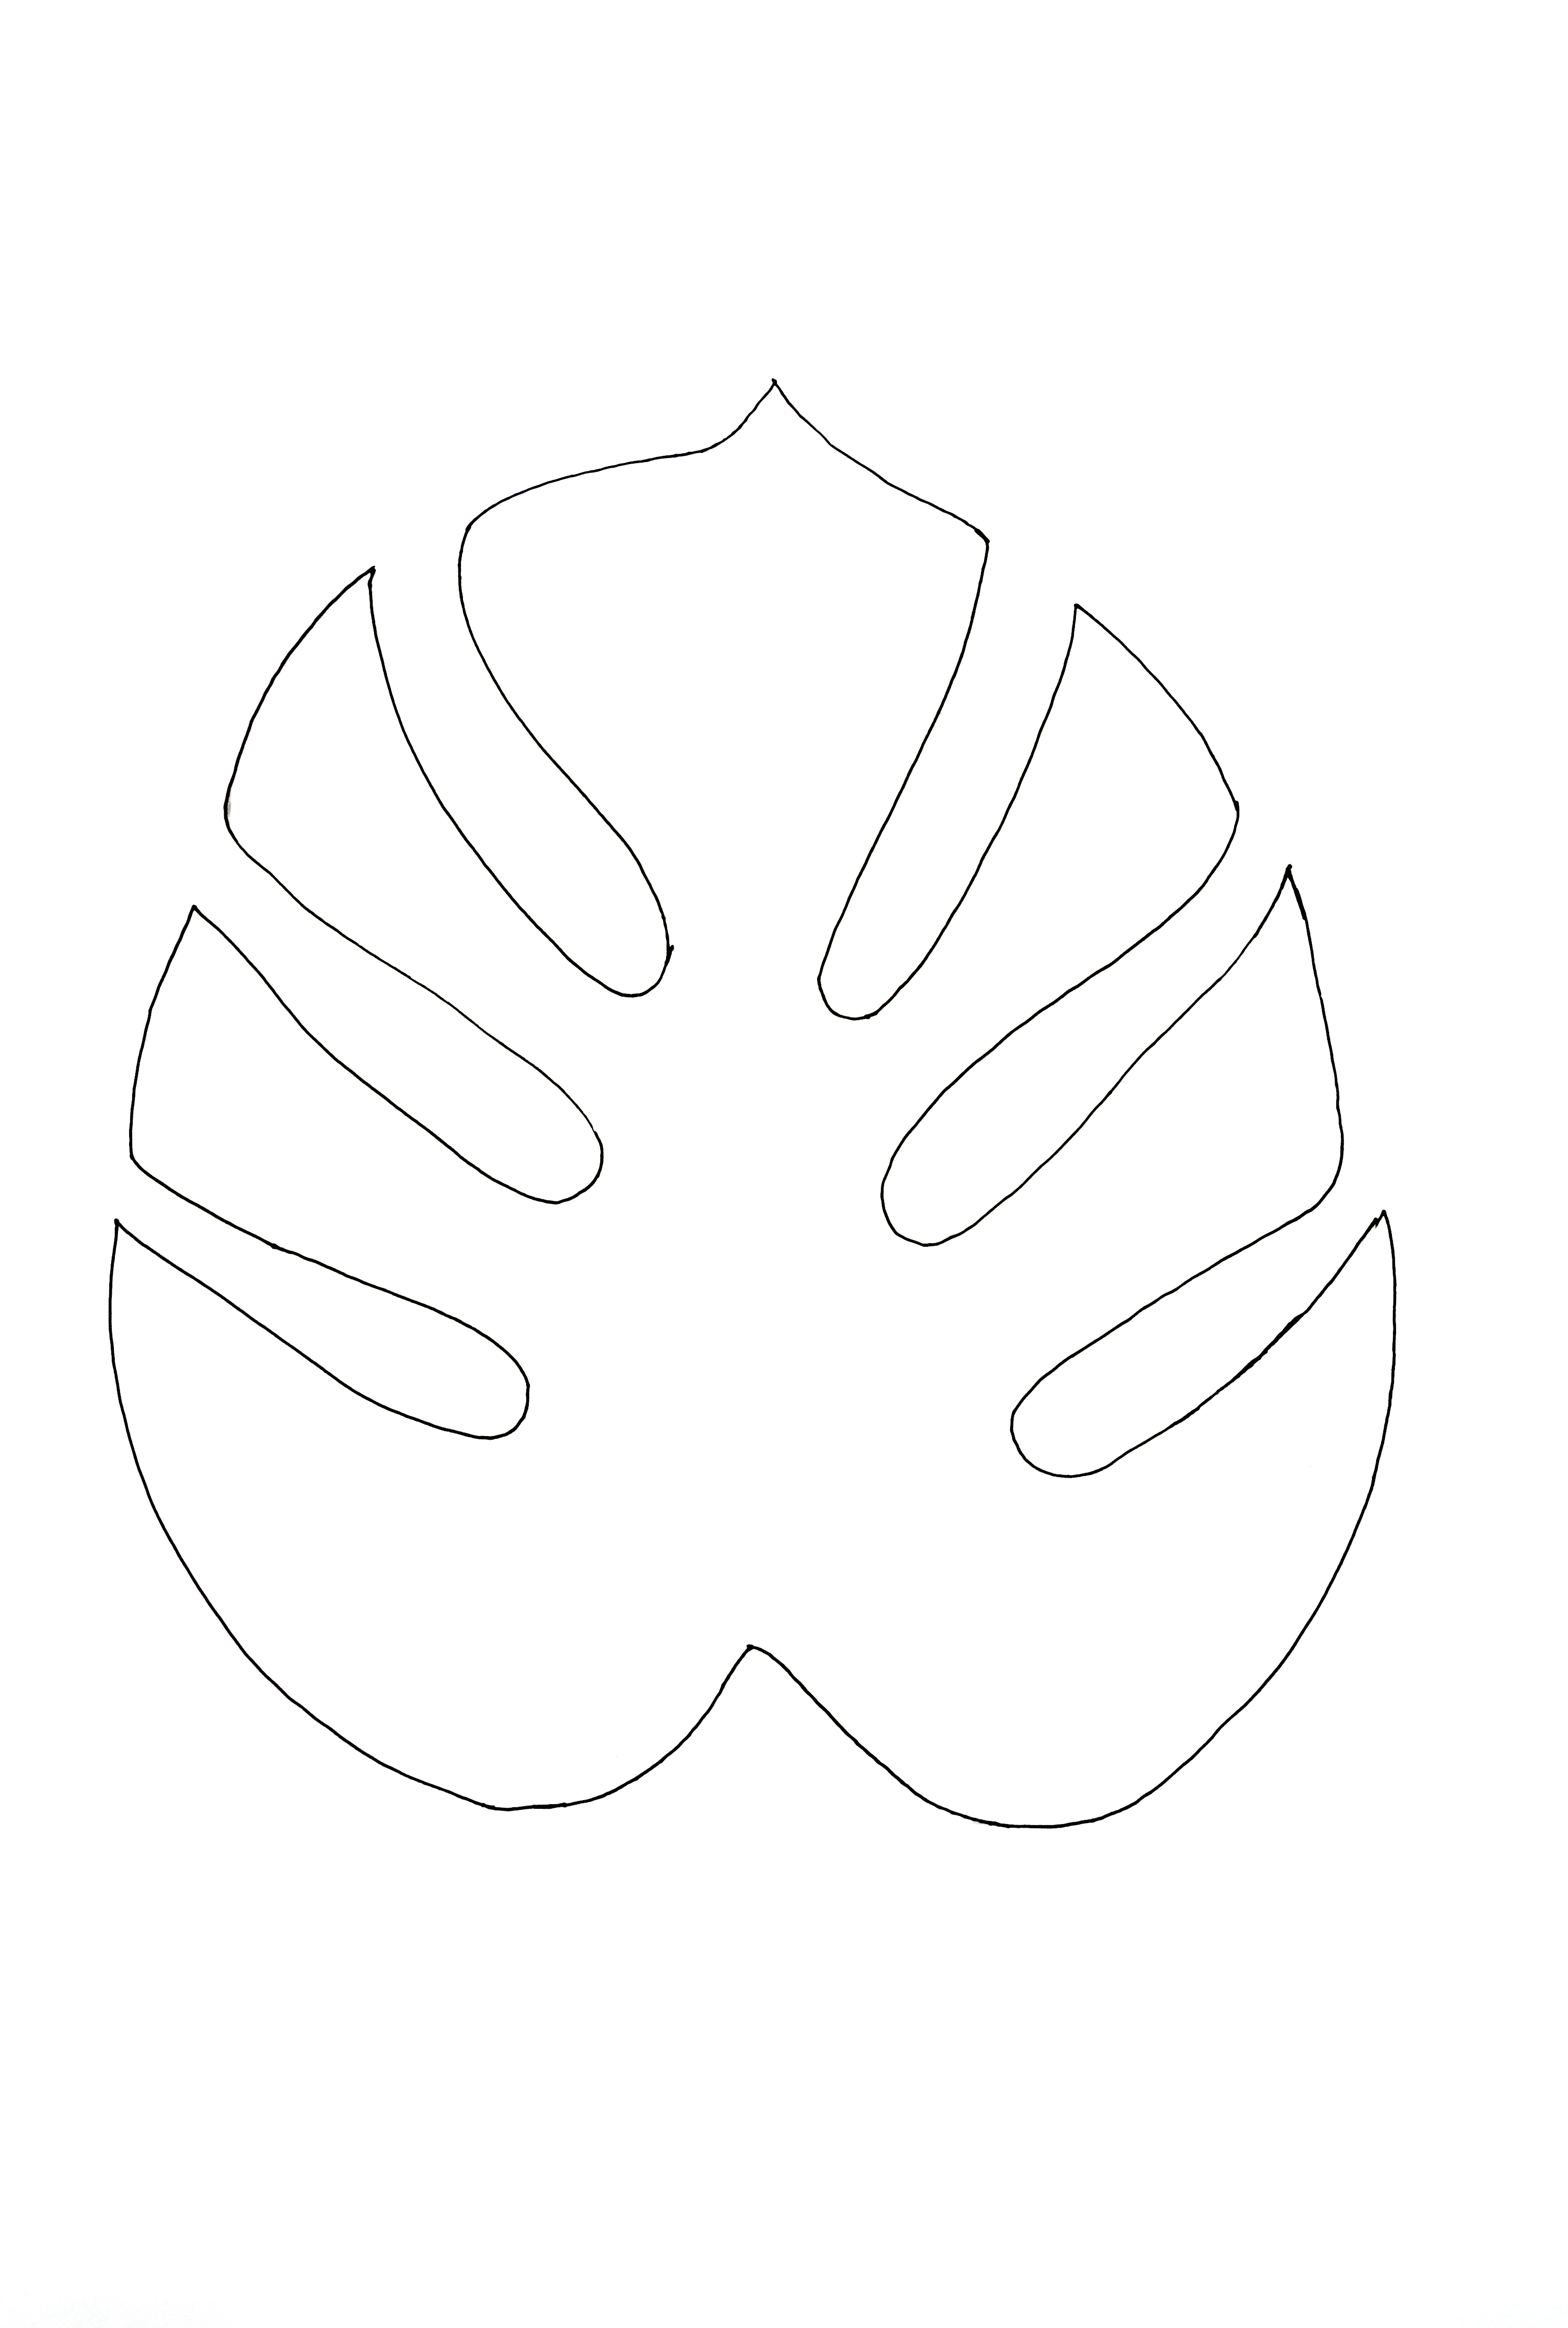 Leaf outline clipartpost.